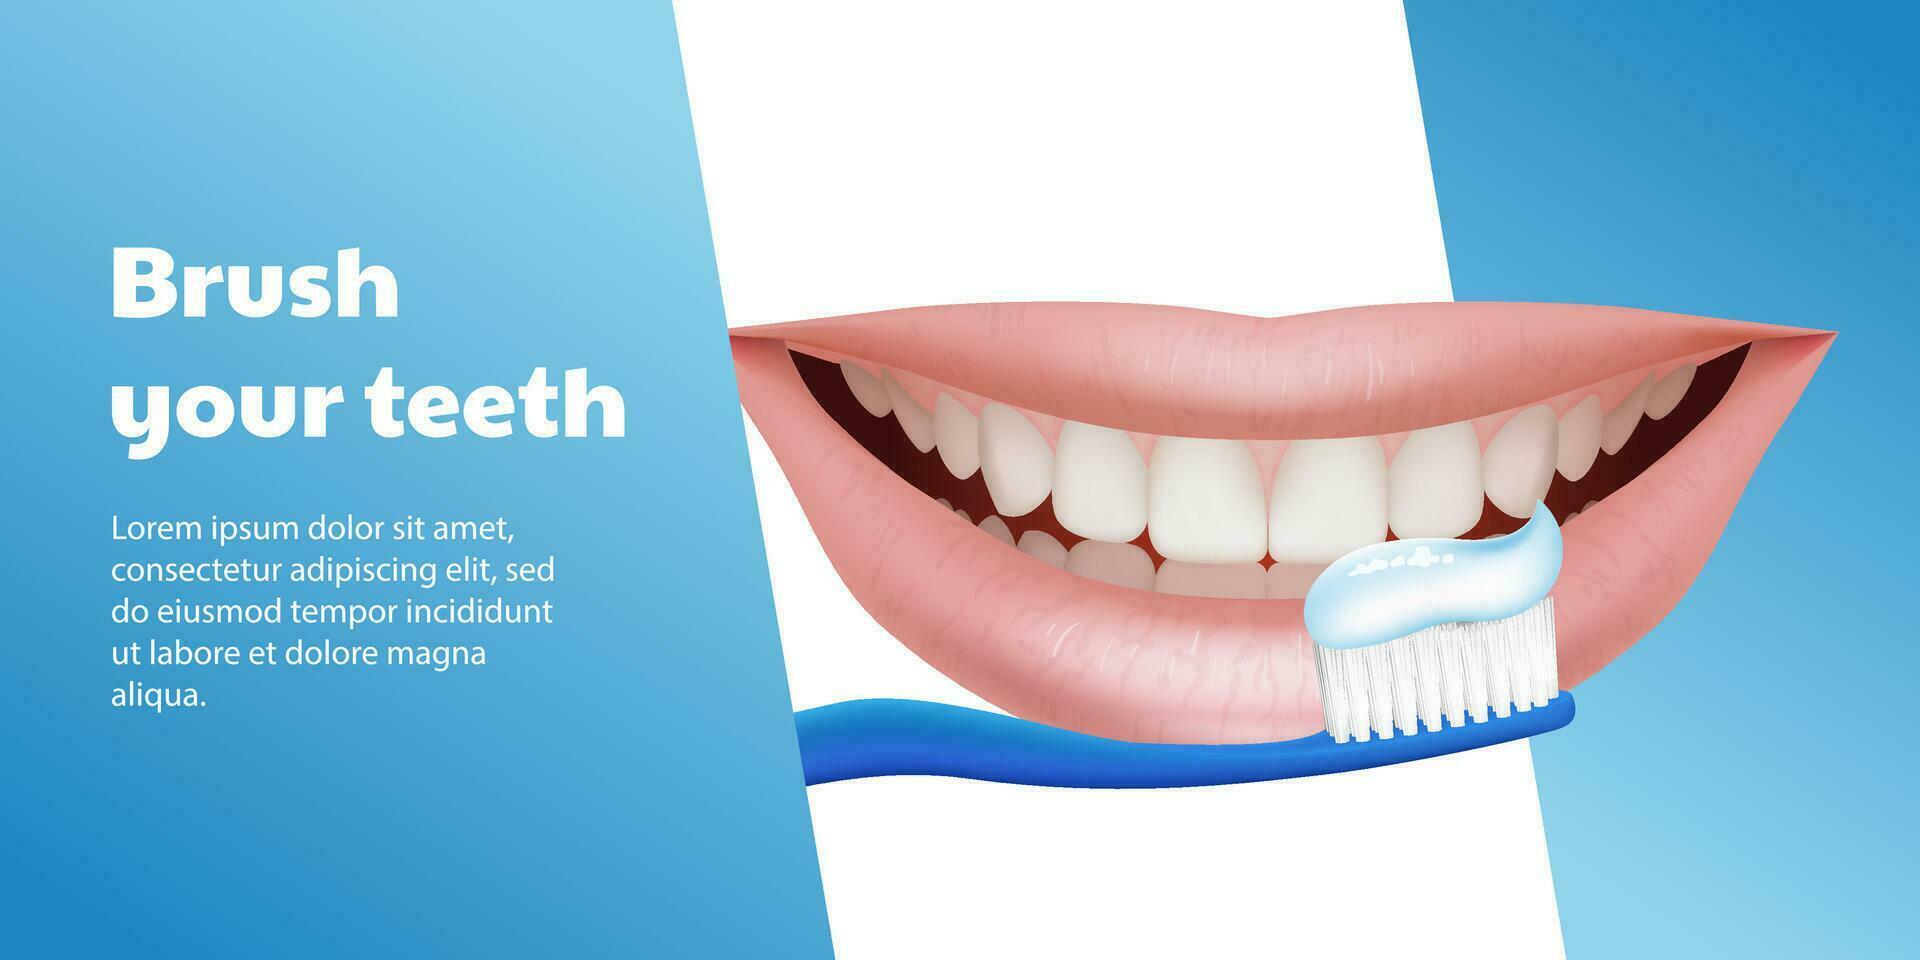 3D illustration of a blue toothbrush brushing realistic teeth with a smiling expression. This medicine banner design promotes dental care and oral hygiene. For dental clinics, health care, and hygiene vector